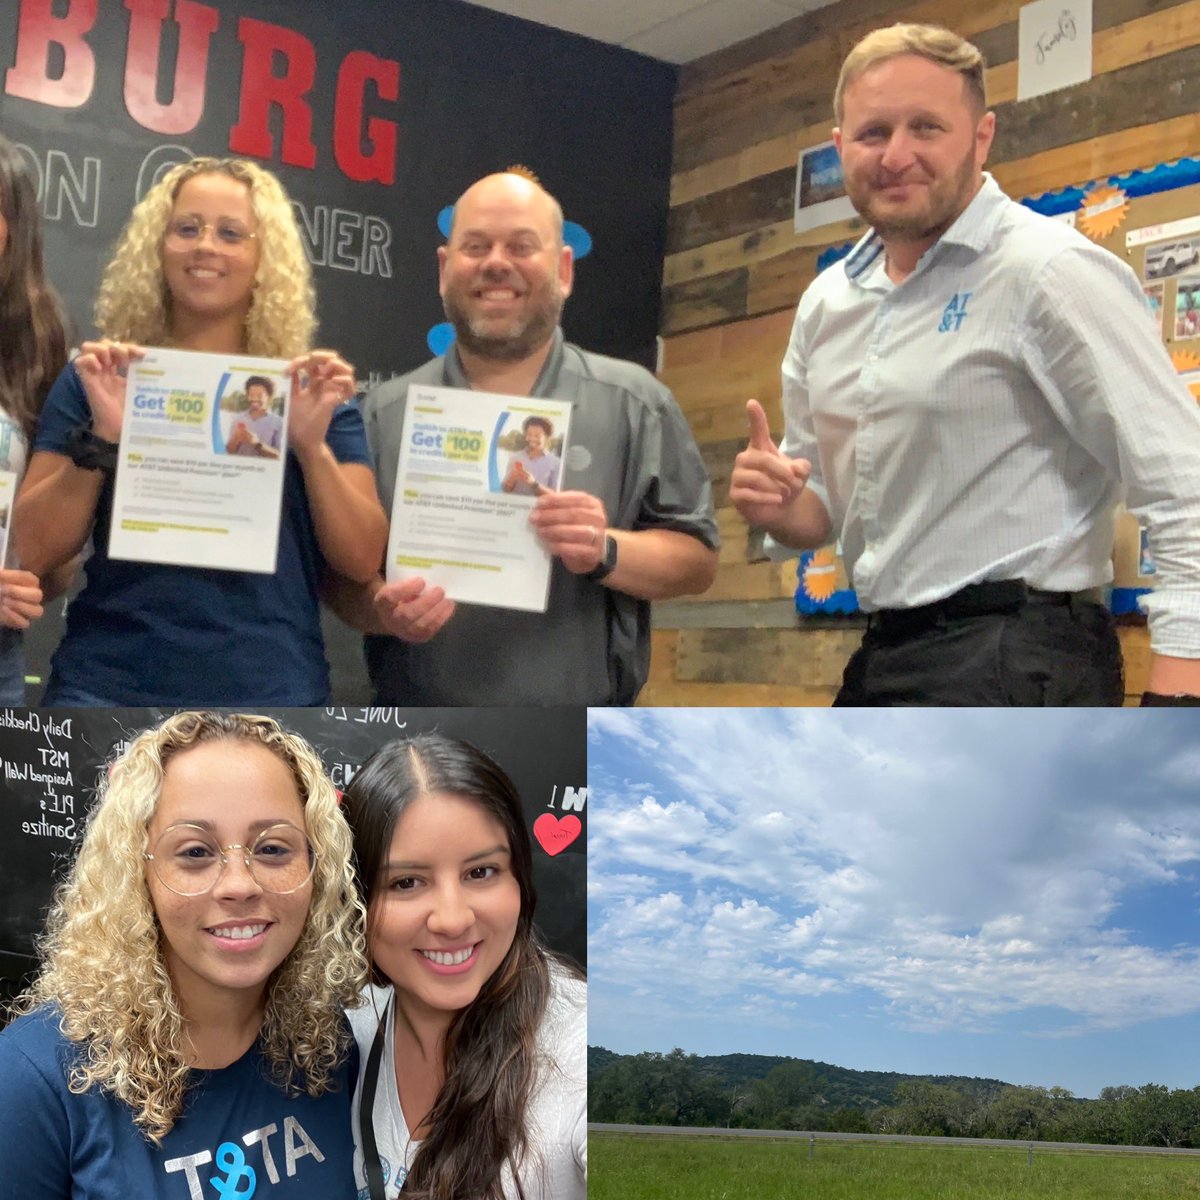 Janette and @PawelATTmobile visiting  Cellular World Kerrville & Fredericksburg! Outstanding leaders at these stores. Congratulations on your success! Keep up the great work.